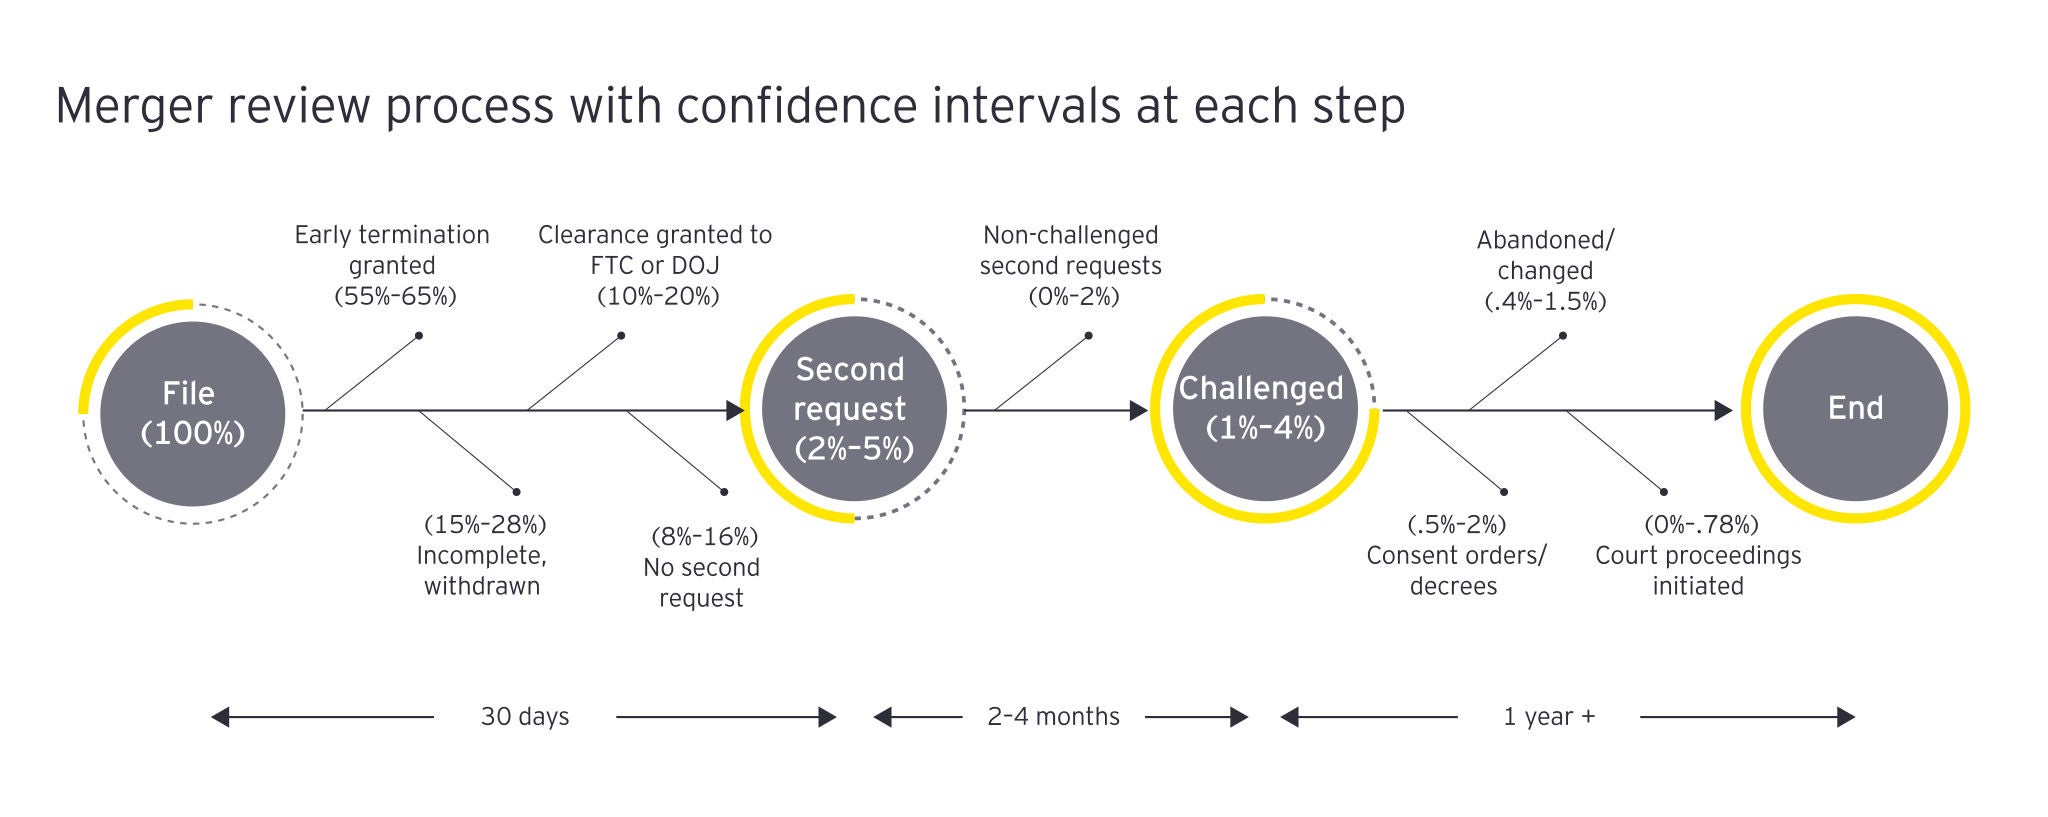 ey merger review process with confidence intervals at each step